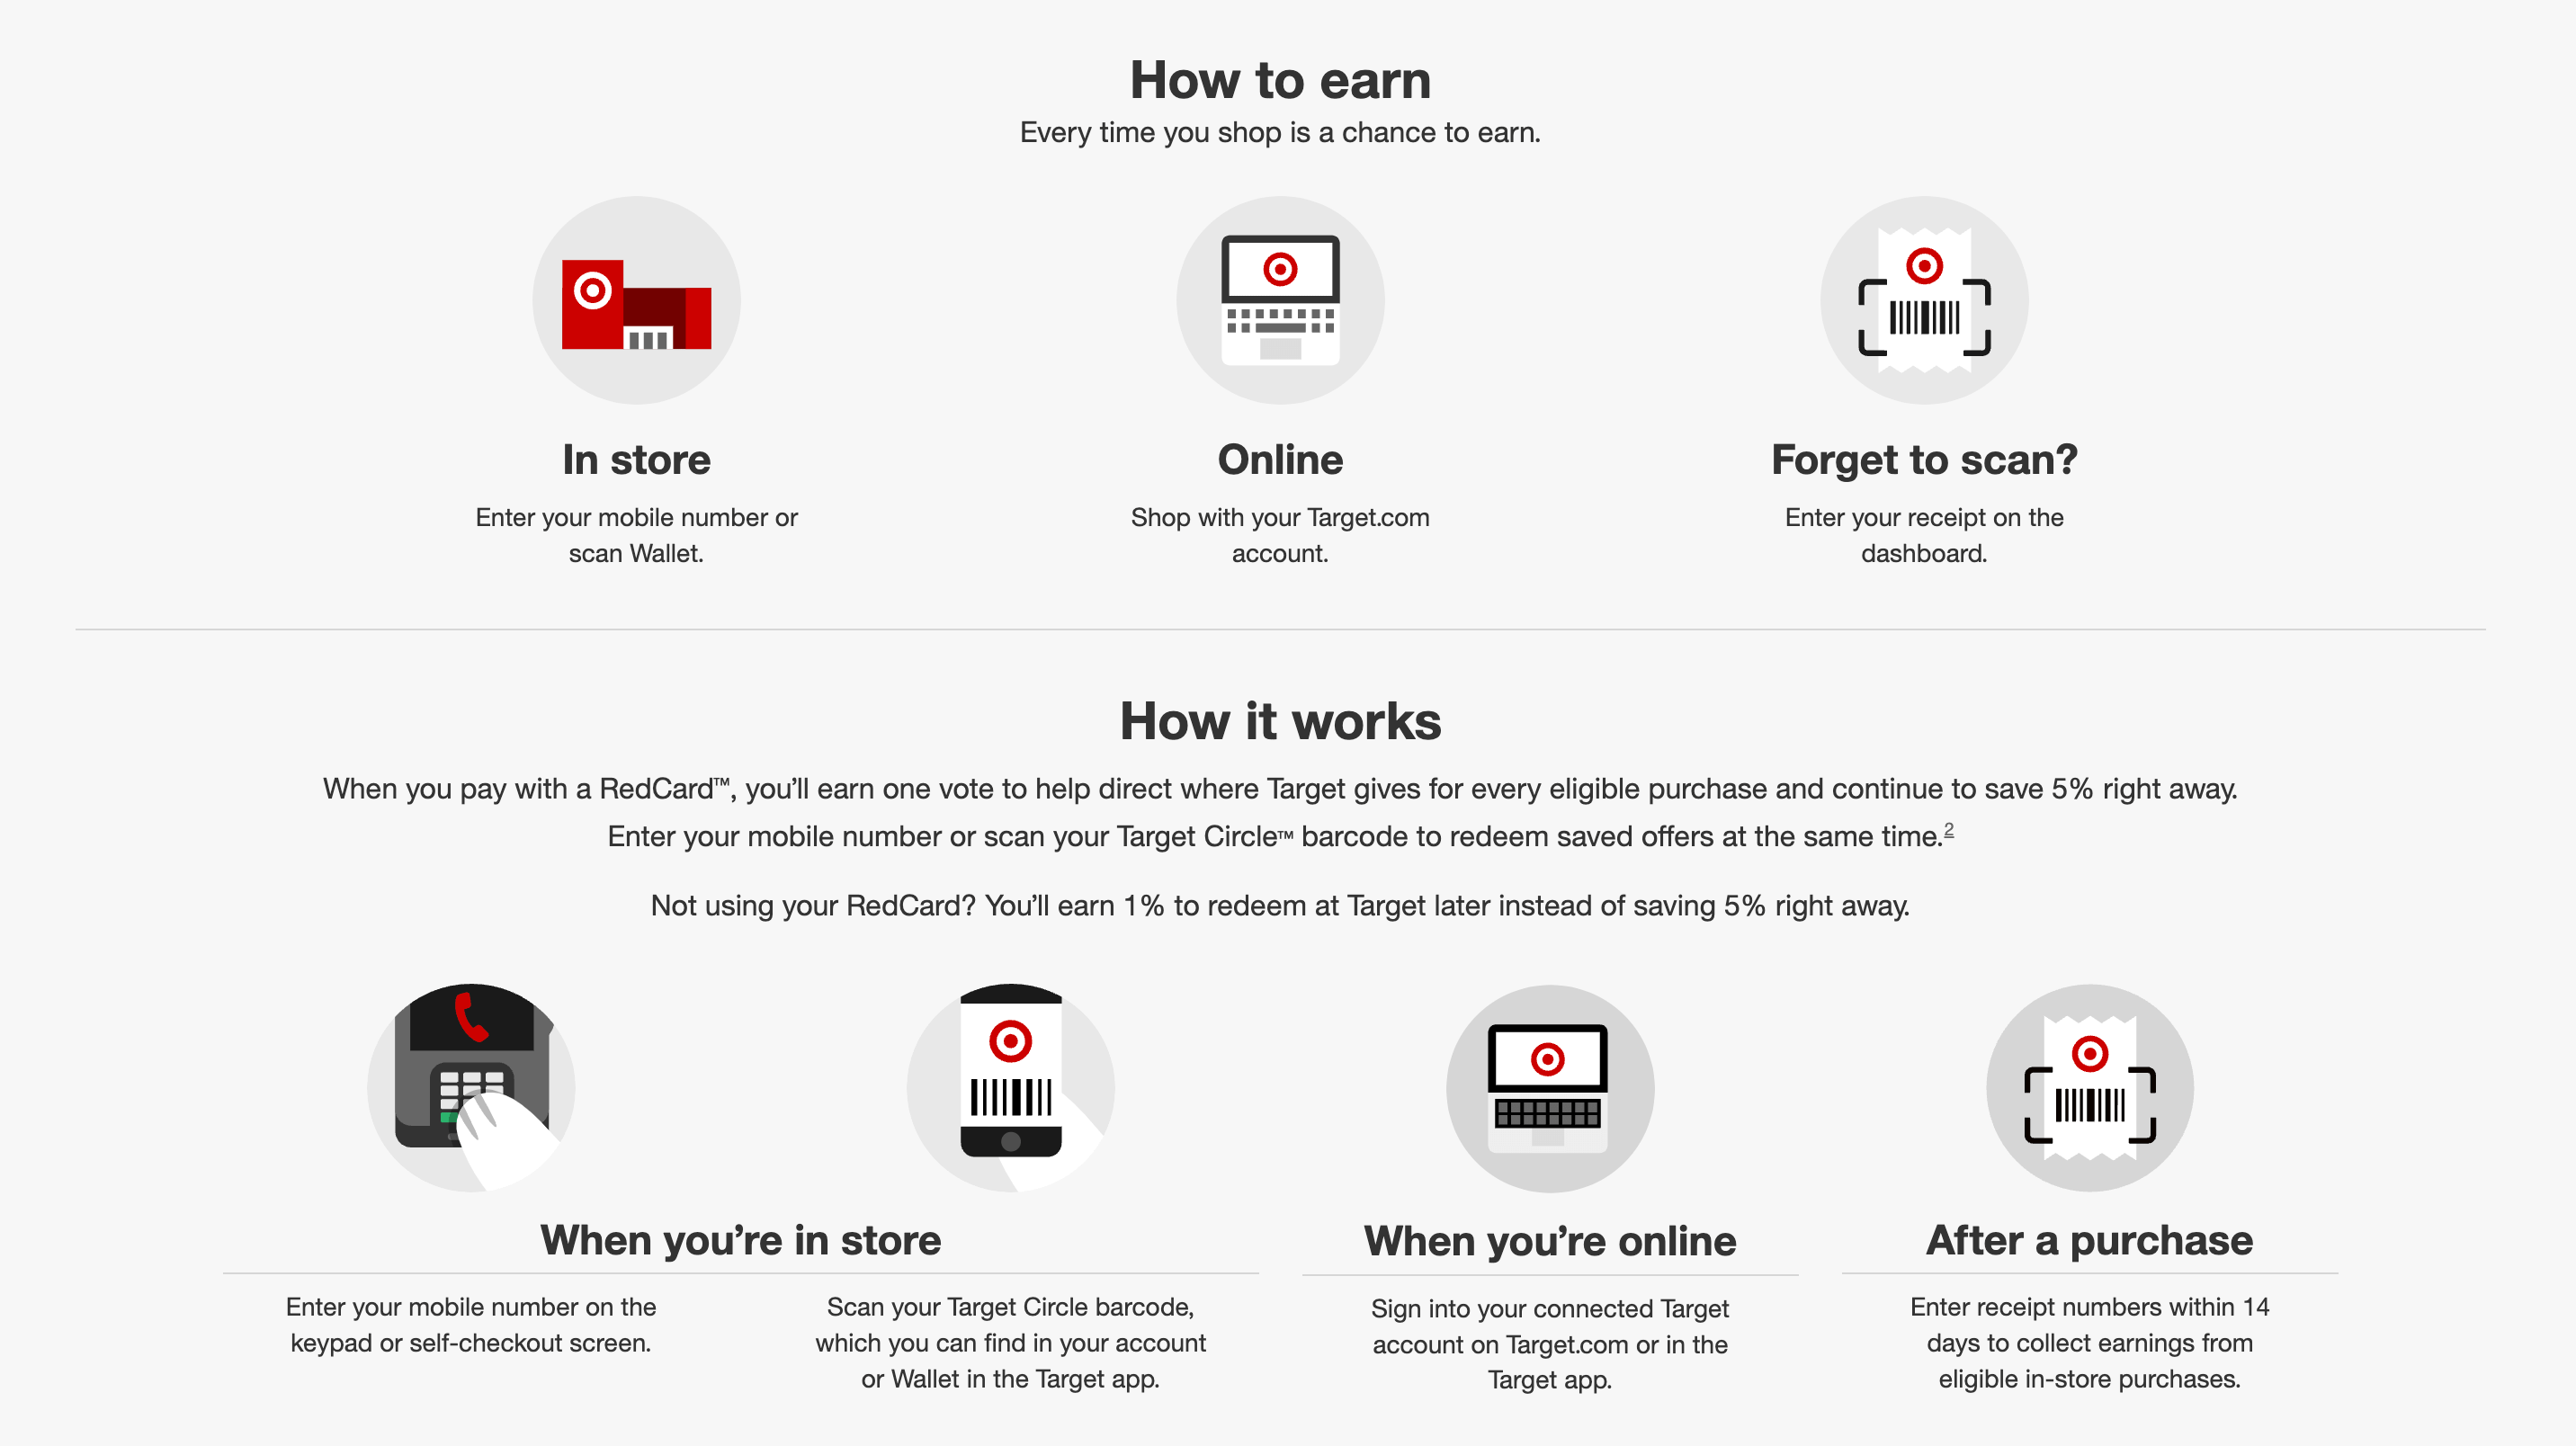 A screenshot from Target Circle’s explainer page showing the different ways to earn and collect points. The top half of the page shows: How to earn. Every time you shop is chance to earn. In store (Enter your mobile number or scan wallet), Online (shop with your Target.com account), and Forget to scan? (enter your receipt on the dashboard). There are three icons for each item: a cartoon version of a red Target store, a laptop with the Target bullseye logo on the screen, and a receipt with a barcode and the Target logo on it. The bottom half of the page shows: How it works. When you pay with a RedCard, you’ll earn one vote to help direct where Target gives for every eligible purchase and continue to save 5% right away. Enter your mobile number or scan your Target Circle barcode to redeem saved offers at the same time. Not using your RedCard? You’ll earn 1% to redeem at Target later instead of saving 5% right away. The next section shows When you’re in store: enter your mobile number on the keypad or self-checkout screen or scan your Target Circle barcode which you can find in your account or Wallet in the Target app. Next, it shows When you’re online: sign into your connected Target account on Target.com or in the Target app. Finally, it shows After a purchase: enter receipt numbers within 14 days to collect earnings from eligible in-store purchases. There are icons representing each of those methods as well.